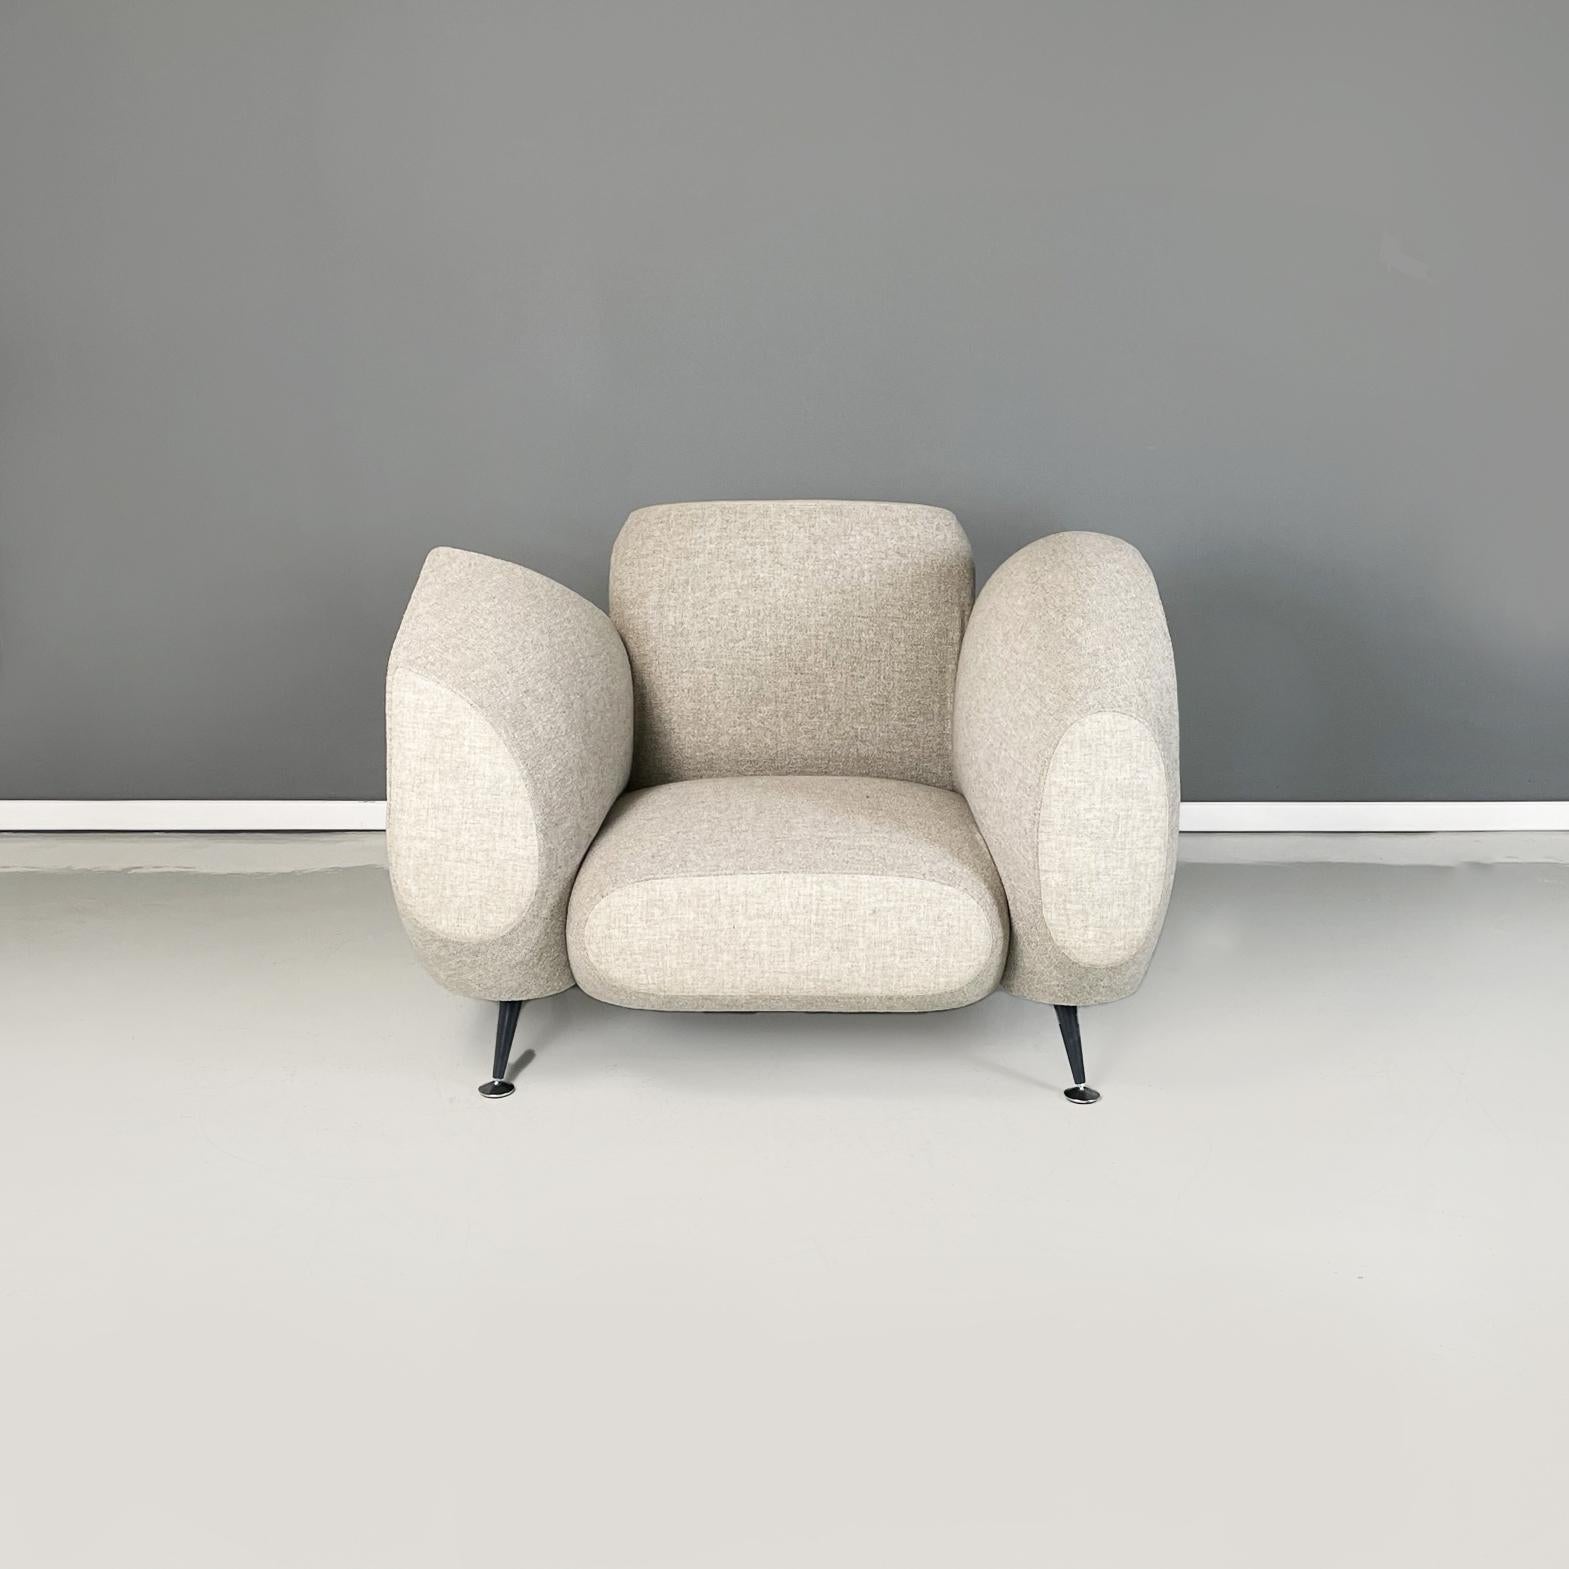 Italian Post-modern Armchair Hotel 21 Lobby by Javier Mariscal for Moroso, 1990-2000s
Armchair mod. Hotel 21 Lobby with asymmetrical geometric profile padded and upholstered in white-beige fabric. The backrest and one armrest have a rounded shape,